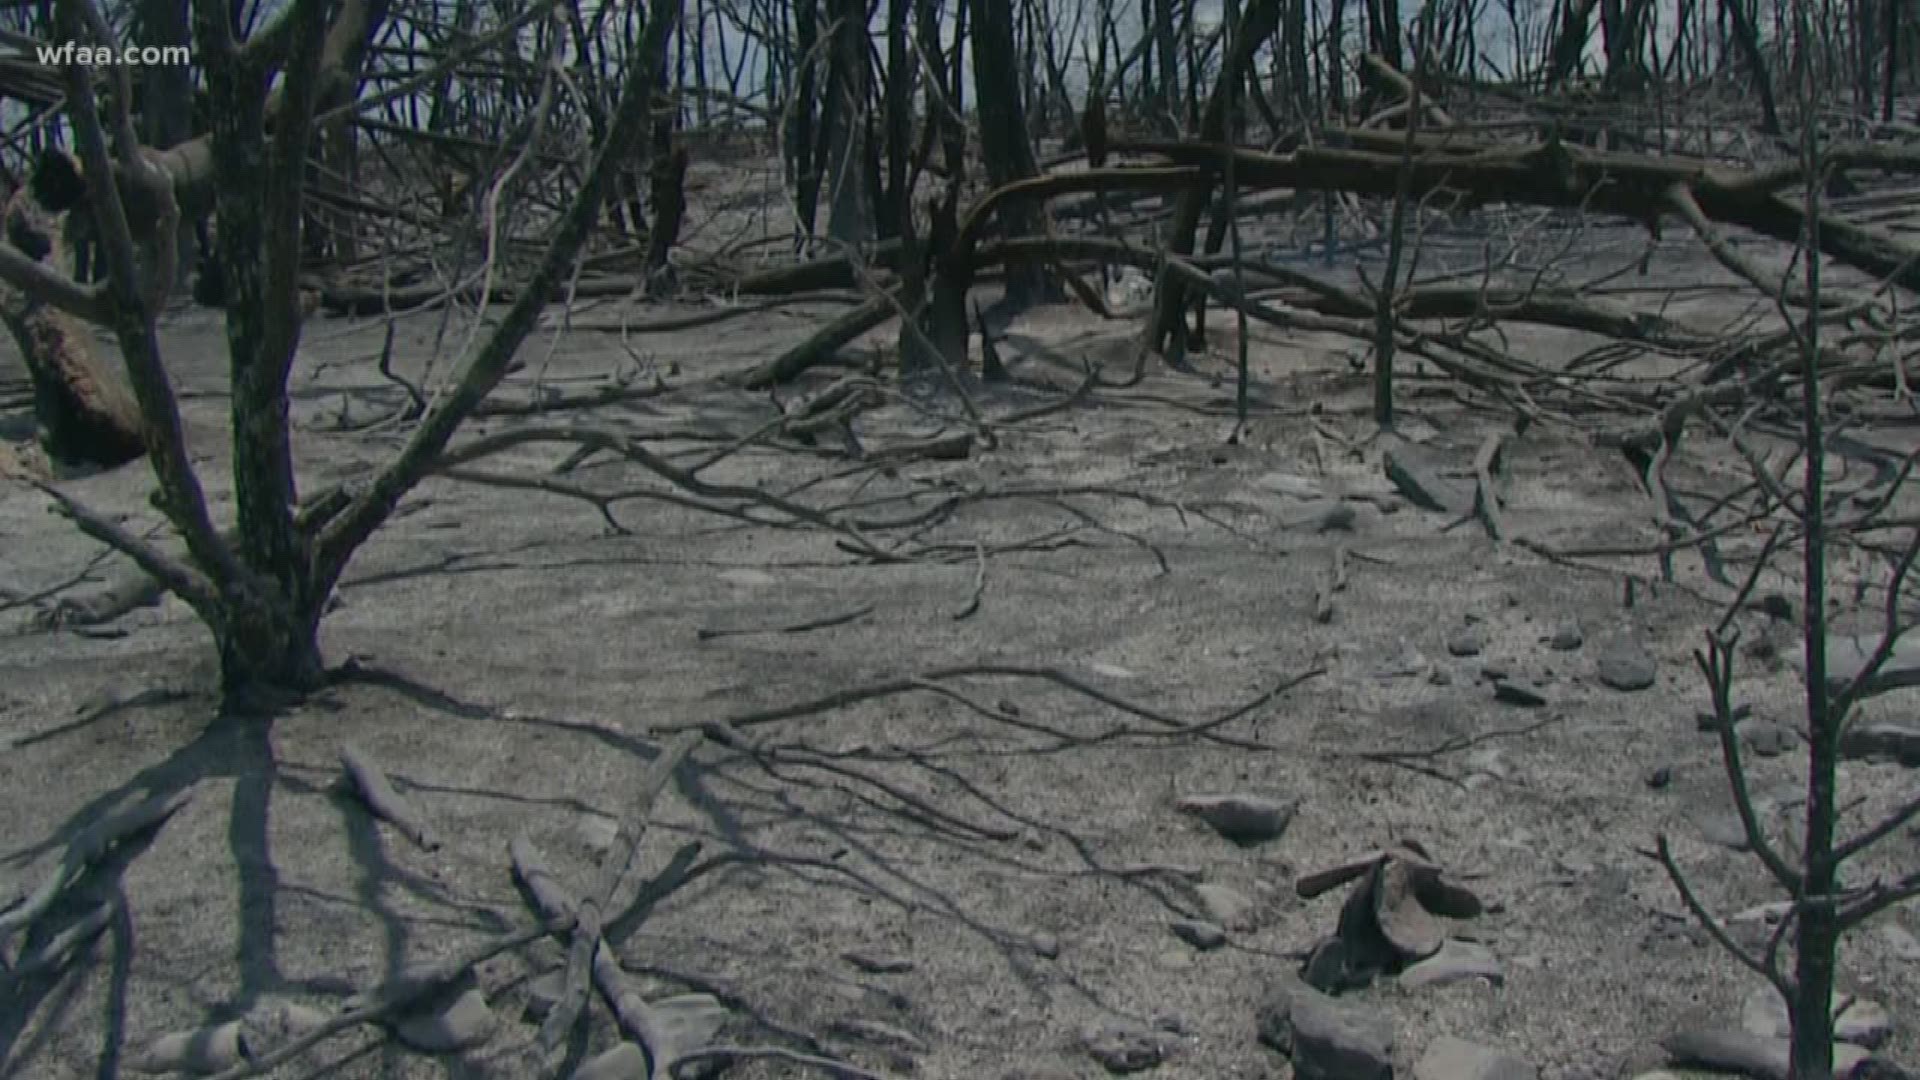 Battle continues against 'Surprise Fire' in Palo Pinto; concern turns